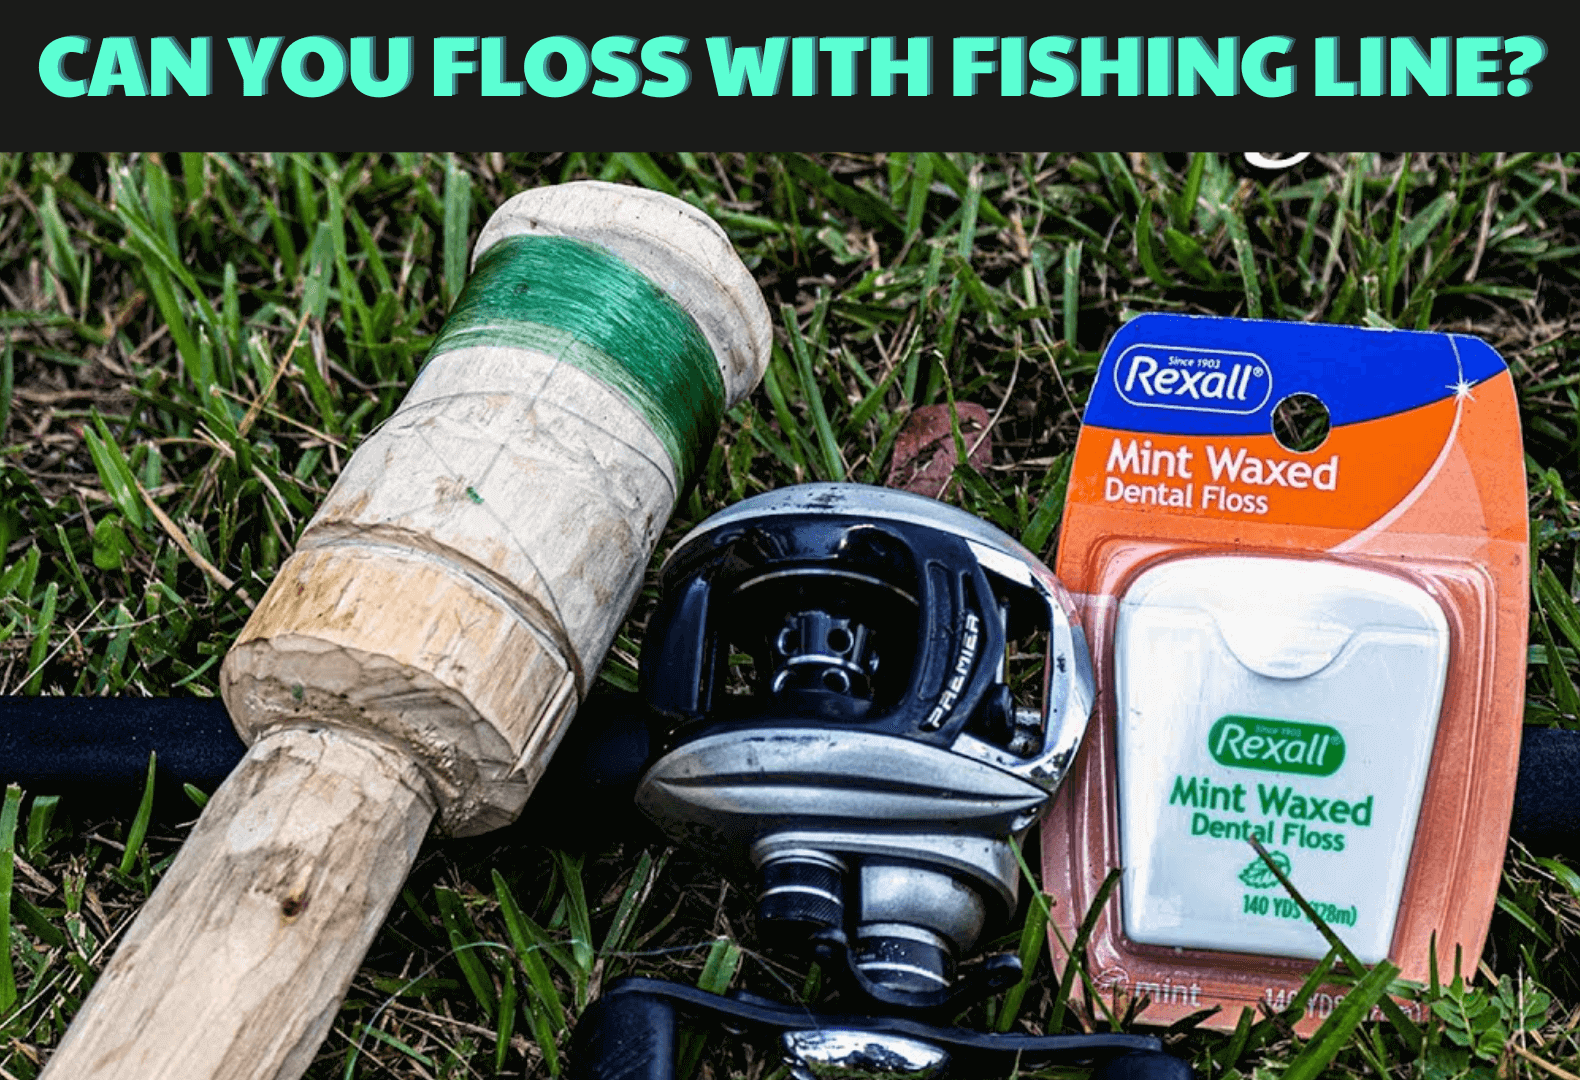 Can you floss with fishing line? Here are some fun facts about